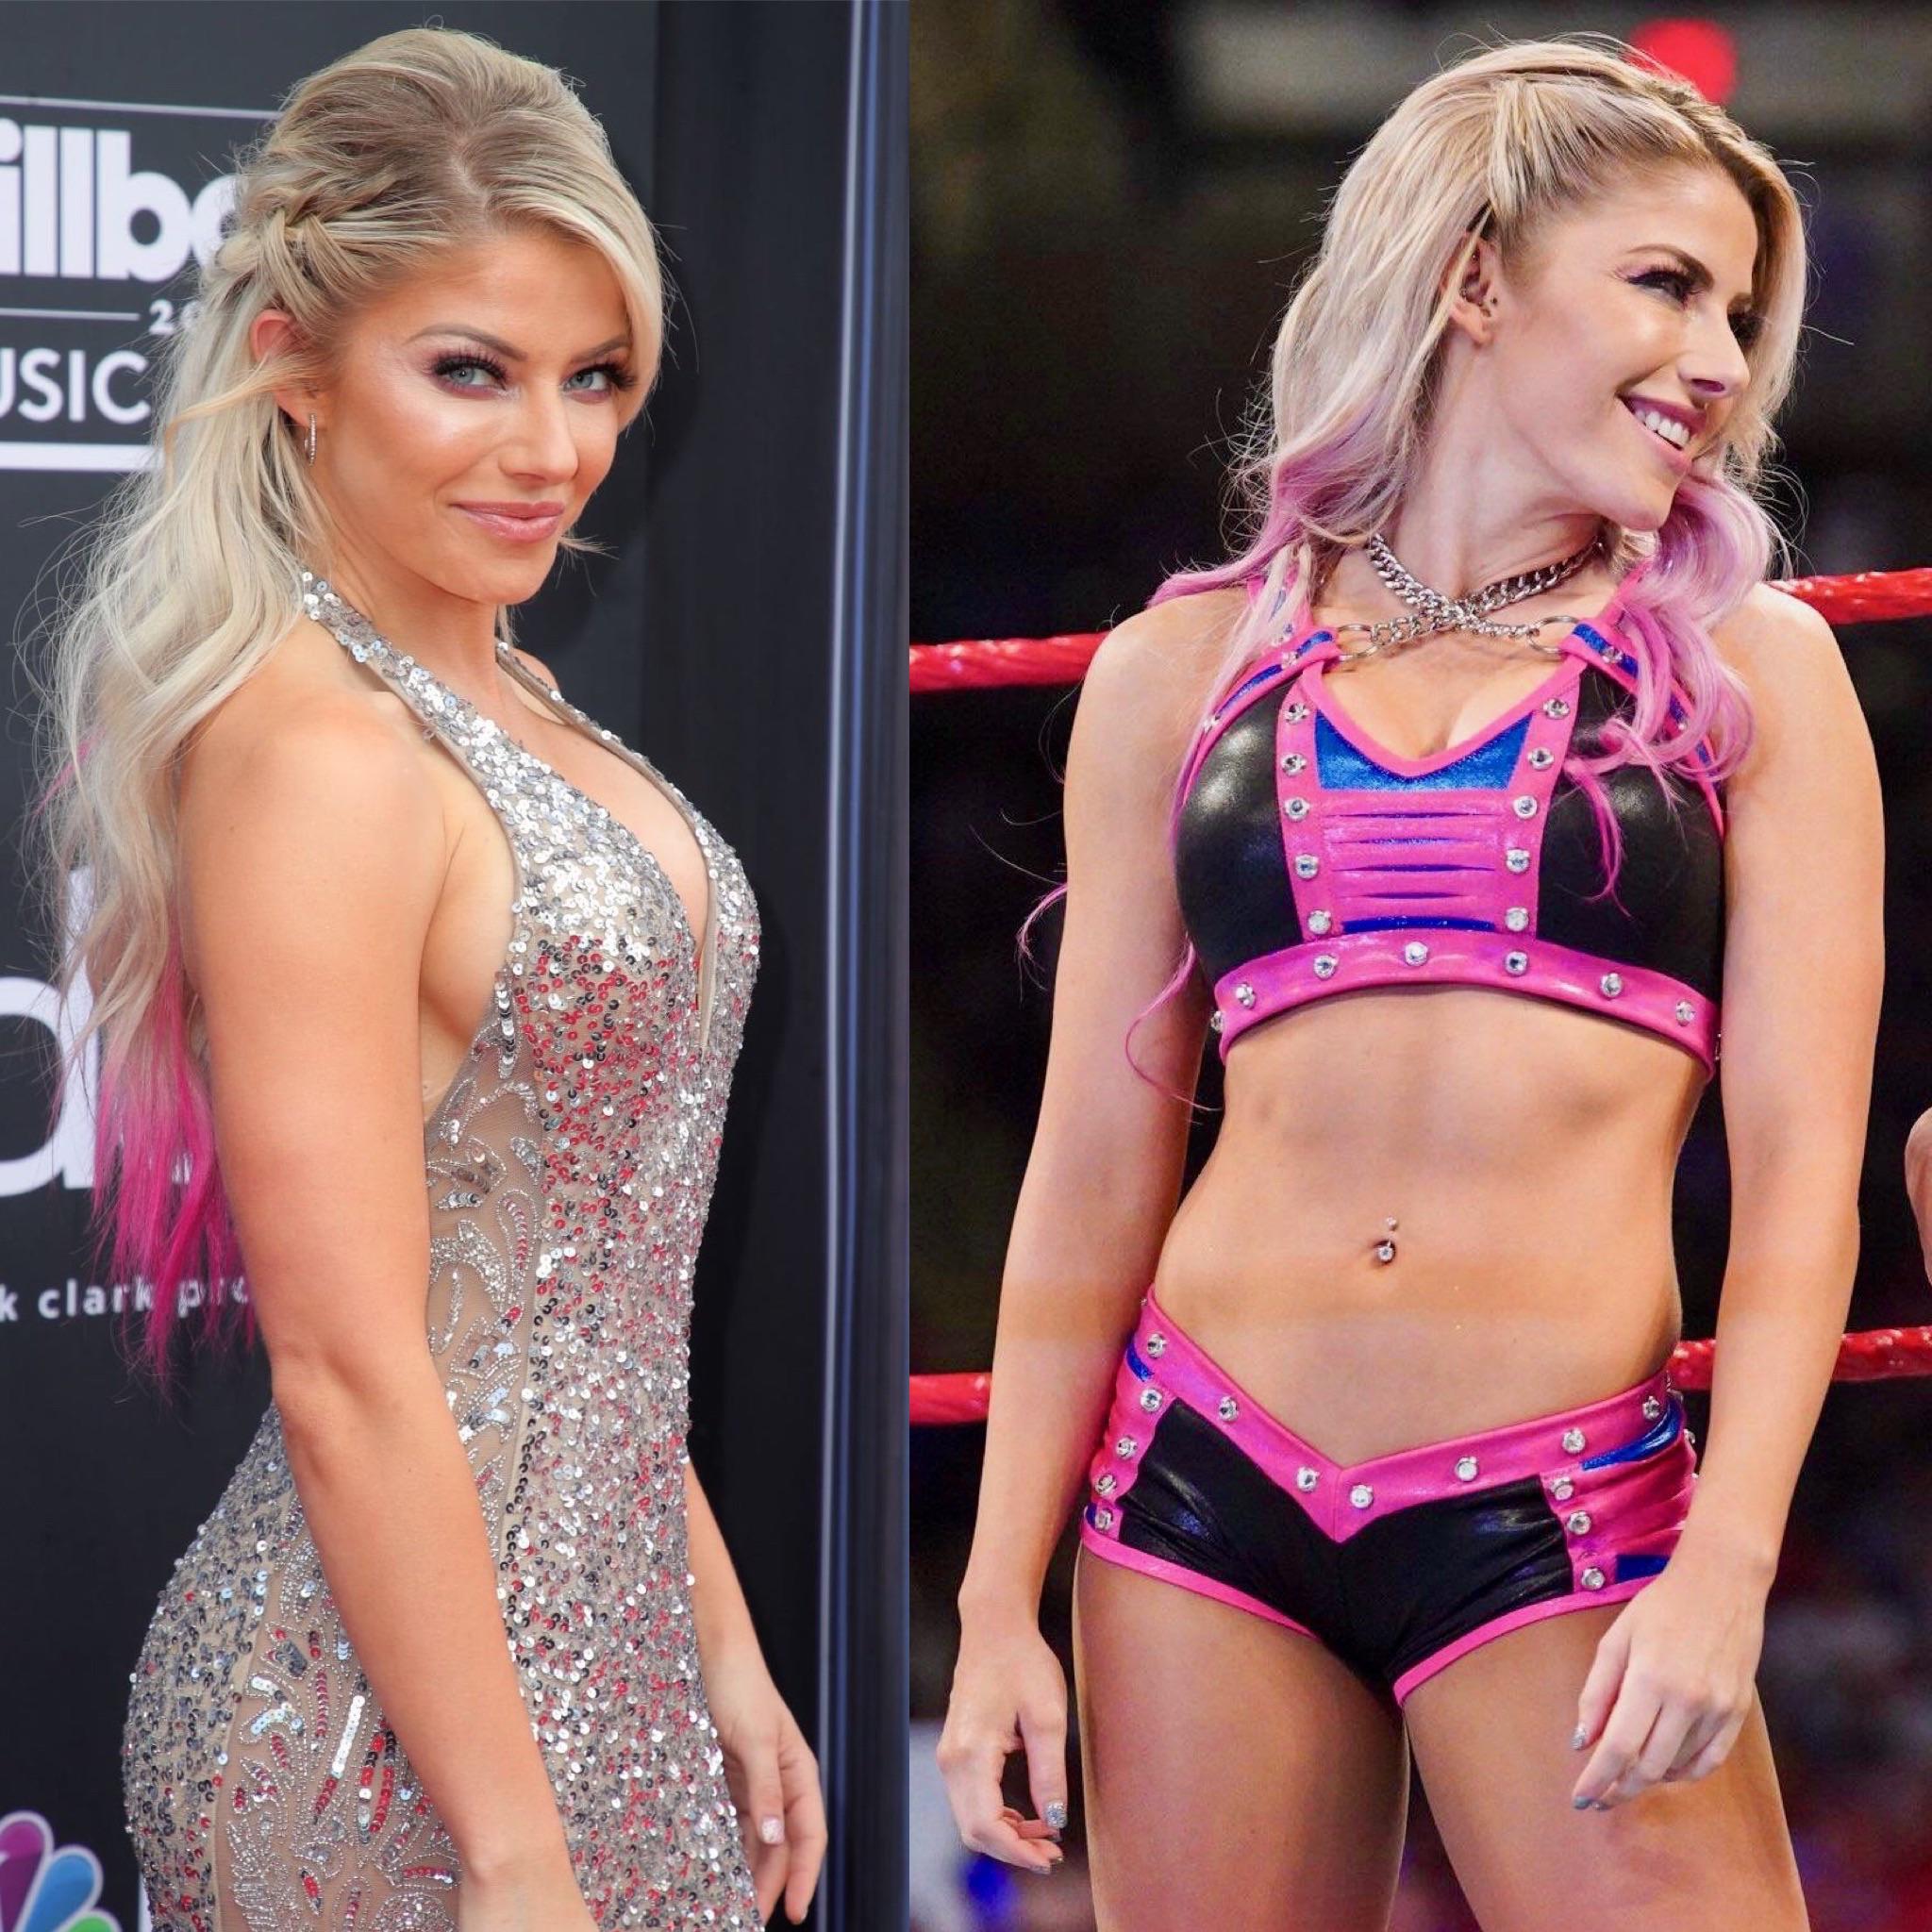 Alexa Bliss is built to fuck